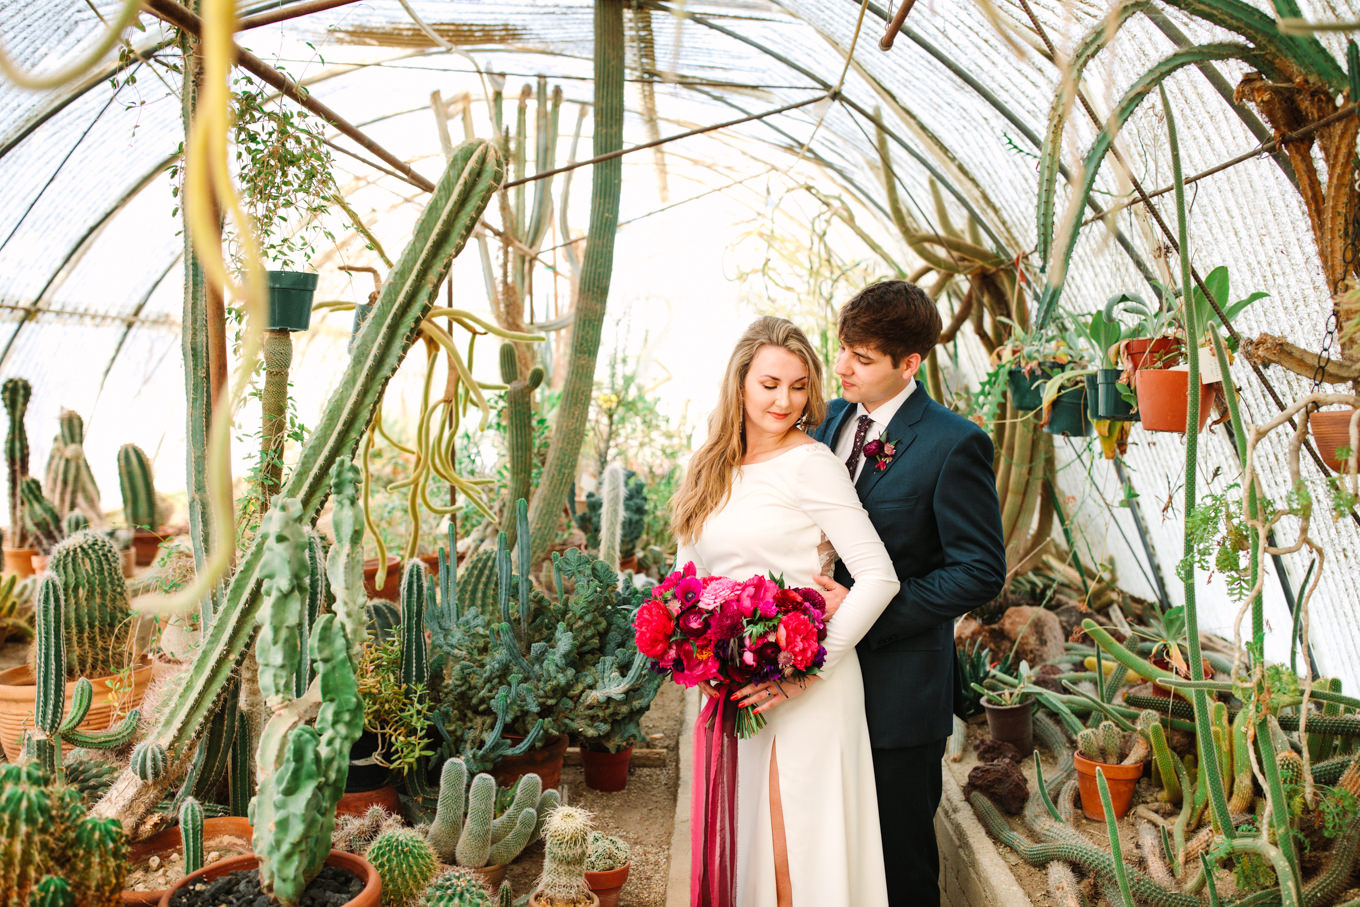 Moorten Botantical Garden bride and groom | Colorful jewel tone Palm Springs elopement | Fresh and colorful photography for fun-loving couples in Southern California | #colorfulelopement #palmspringselopement #elopementphotography #palmspringswedding Source: Mary Costa Photography | Los Angeles